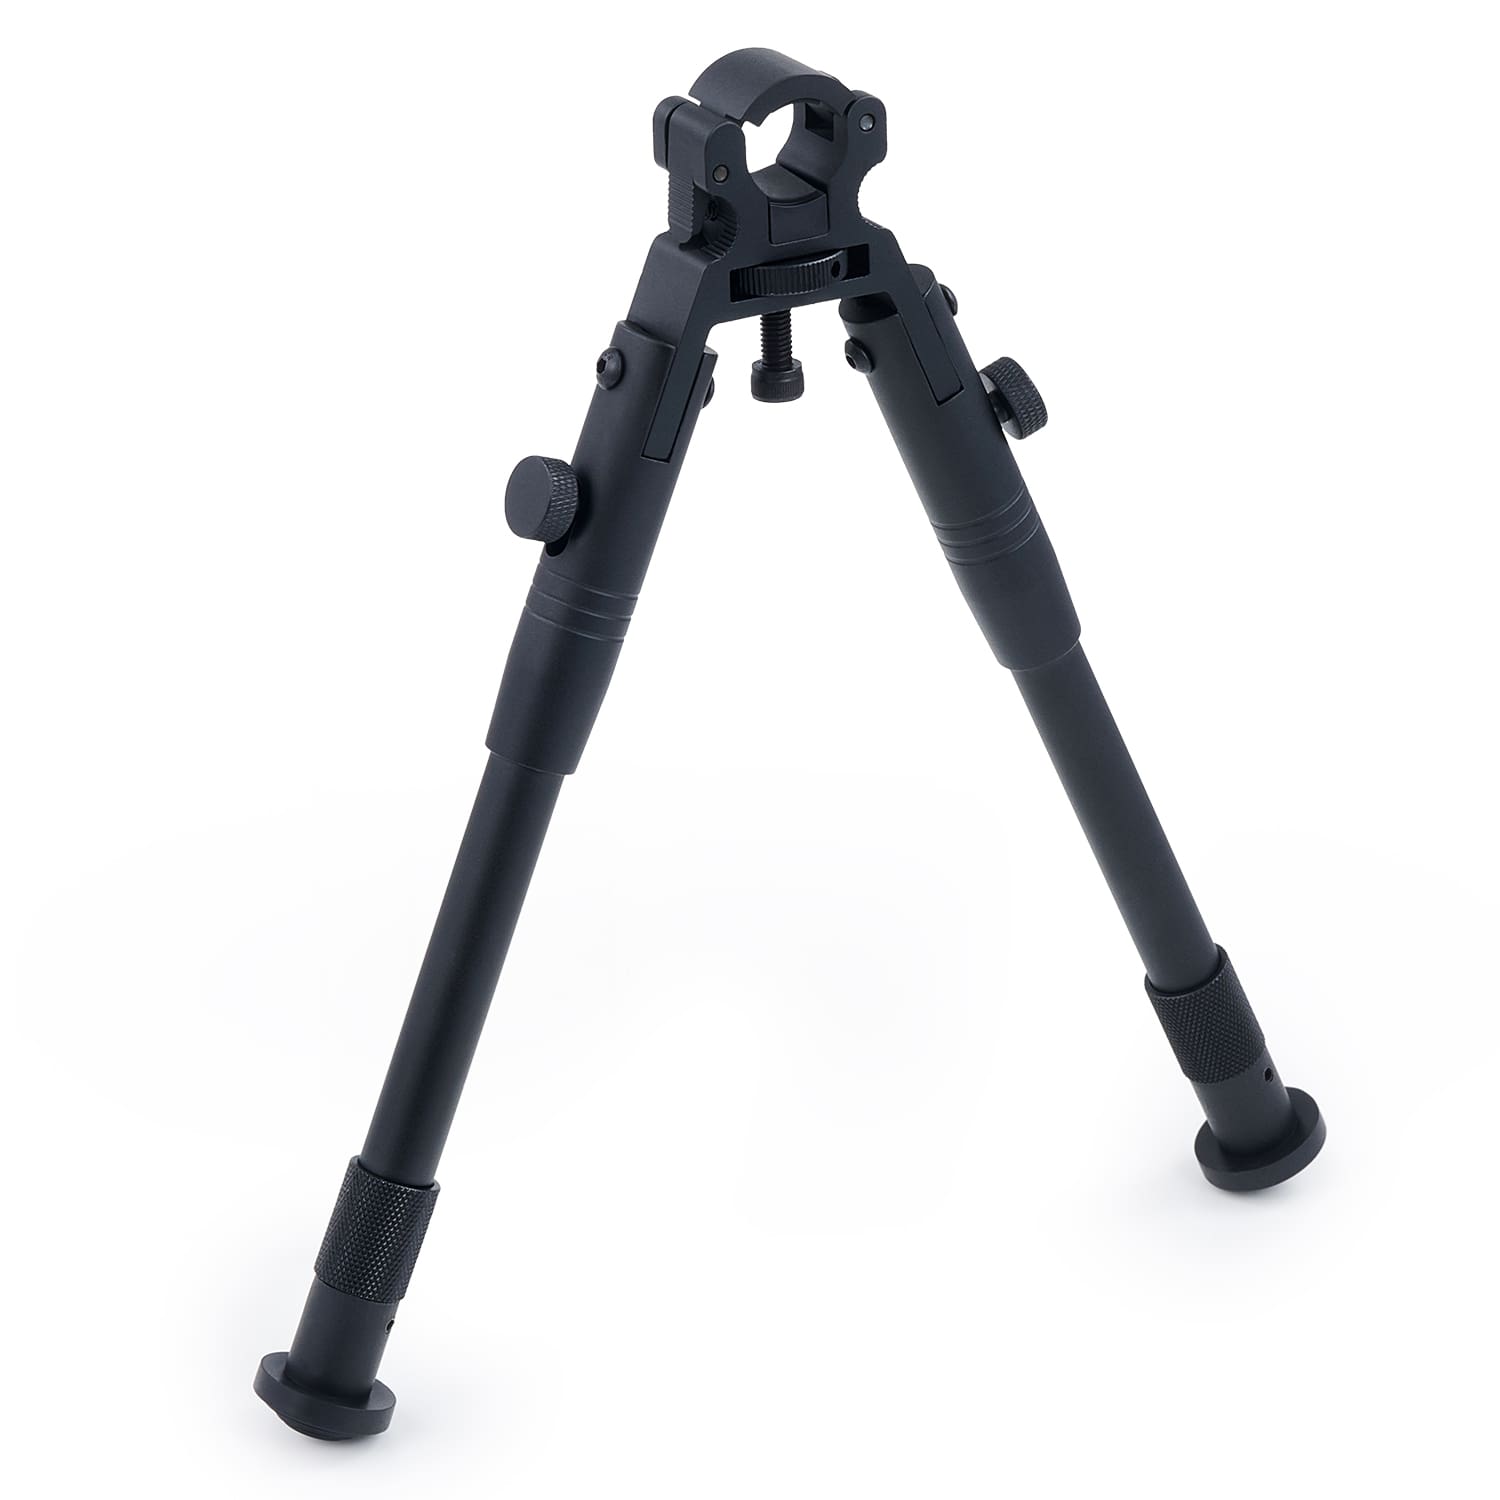 PINTY Rifle Bipod with Quick Release Spring Clamp for 0.43″ to 0.75'' Barrels Adjustable Leg Width and Height from 8″ to 10.5″ Tall, Hunting Gun Accessory with Matte Black Oxide Coating Rubber Feet